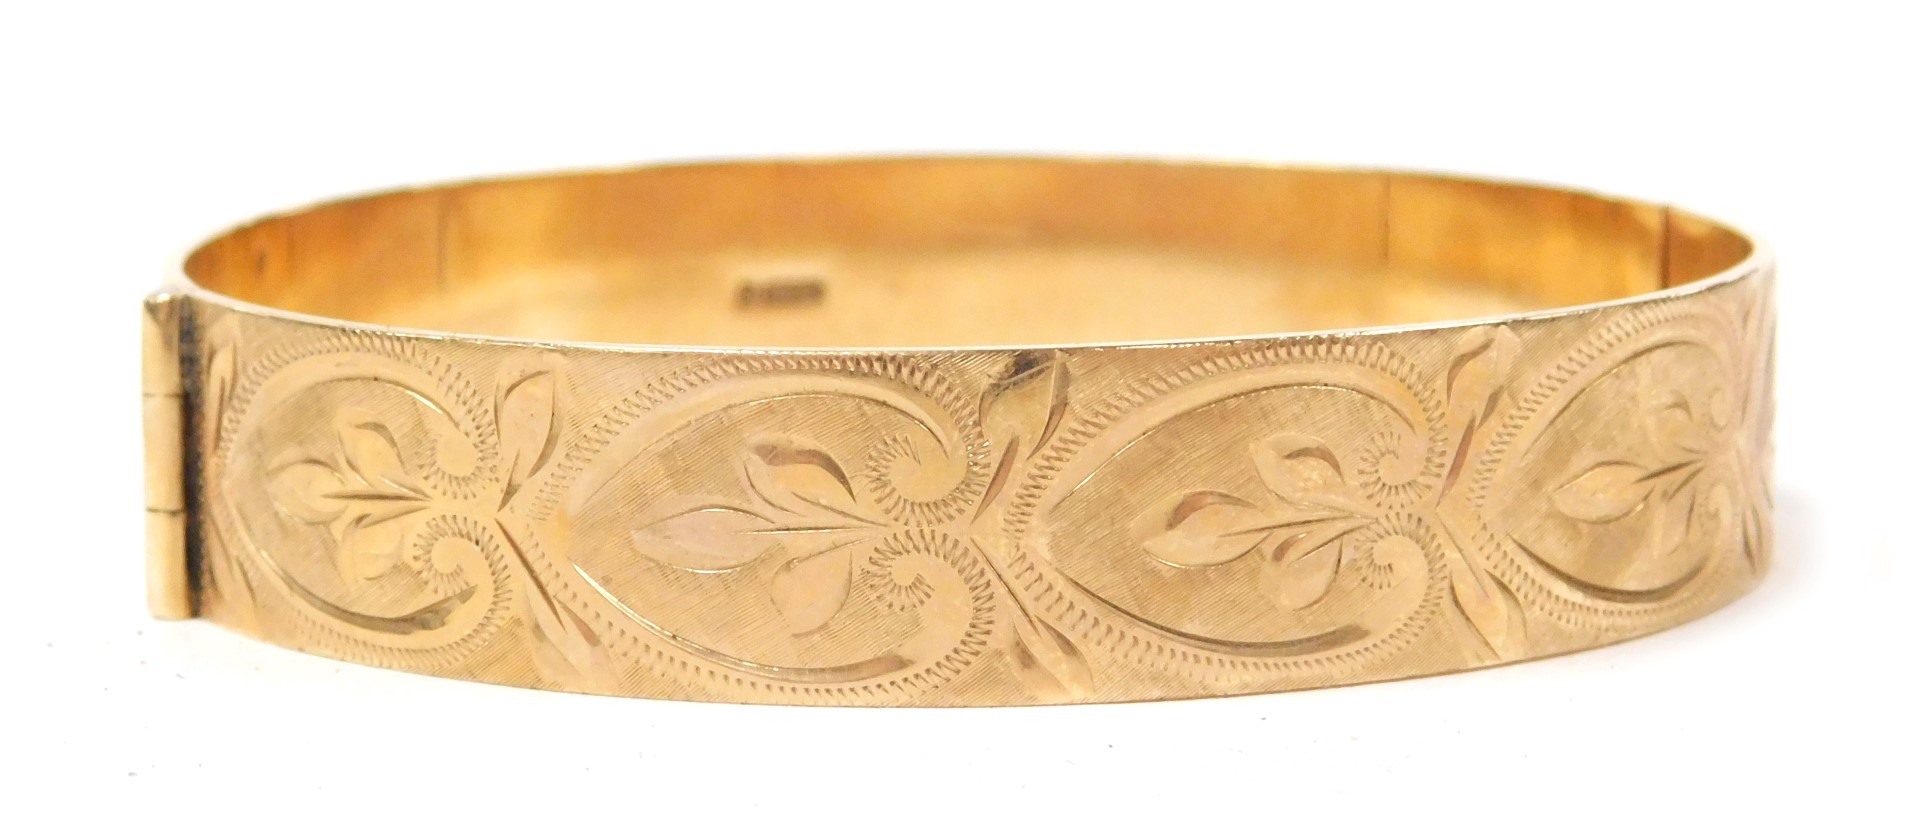 A 9ct gold bangle, with engraved repeating acanthus leaf decoration, on a snap clasp, 24.5g.